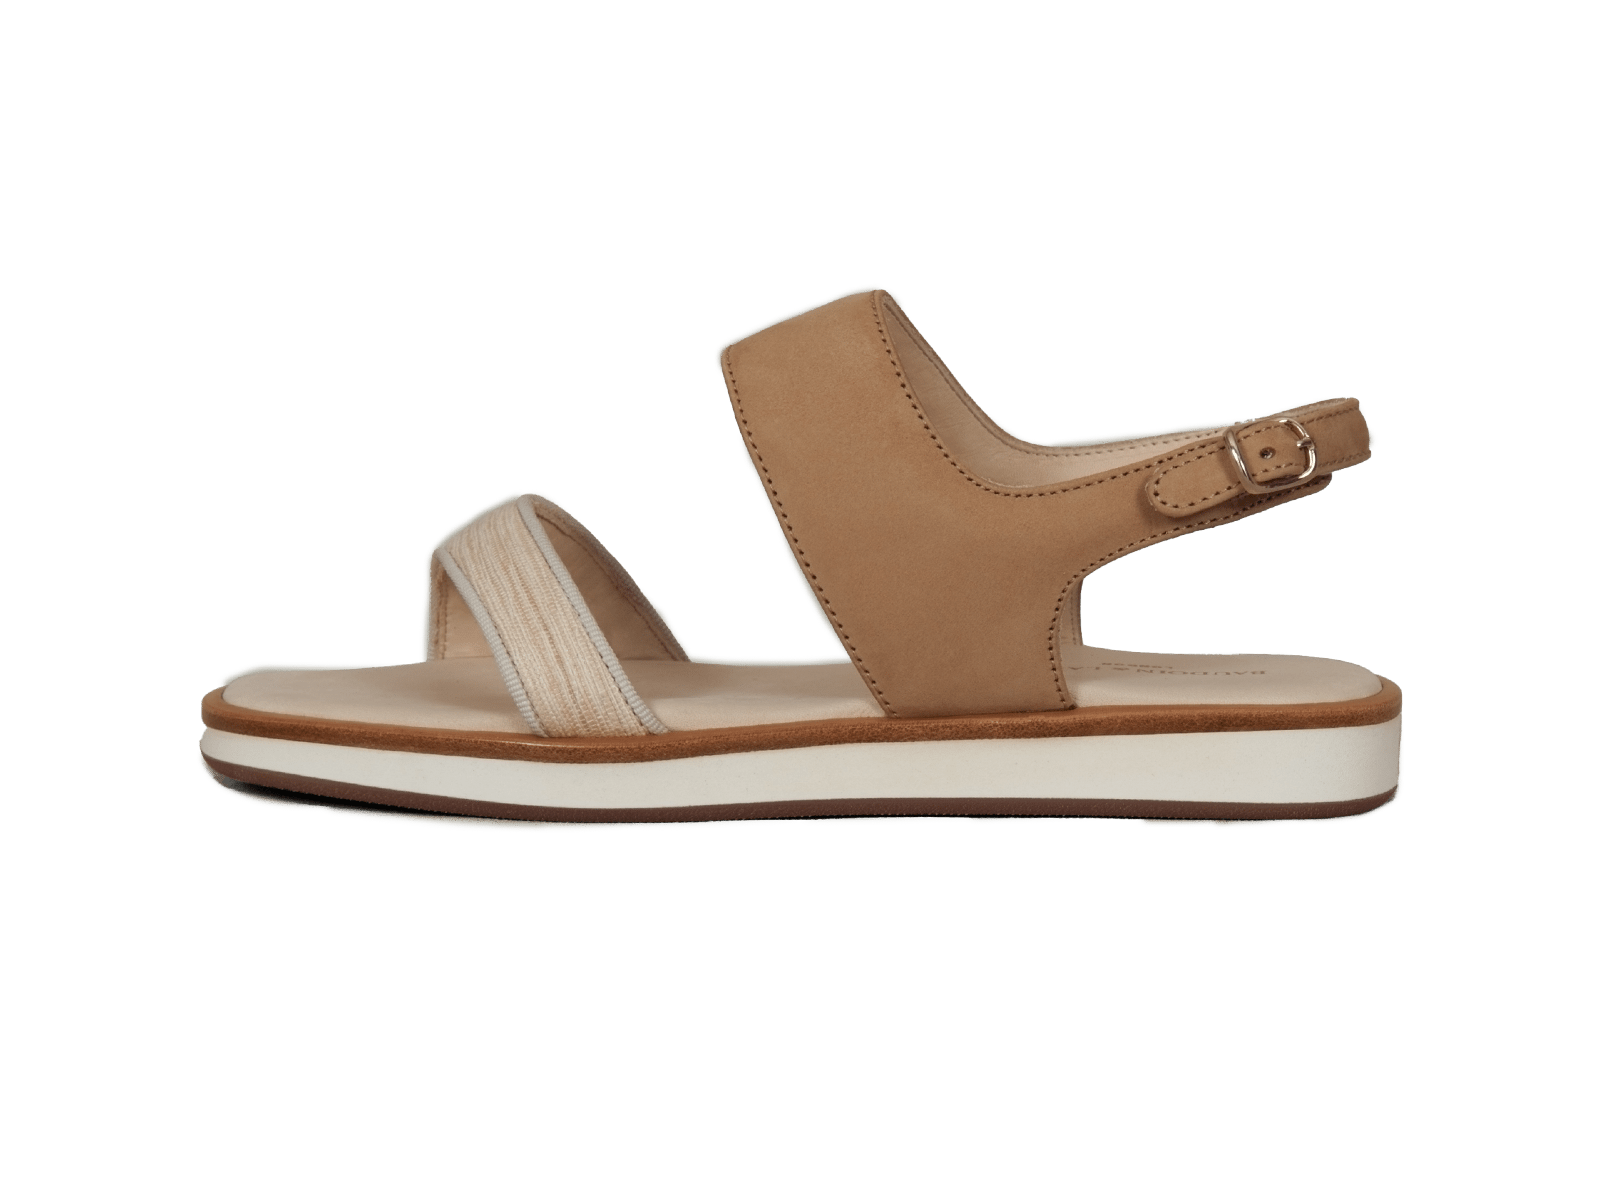 Nuage Sandal in Natural Silk and Nubuck